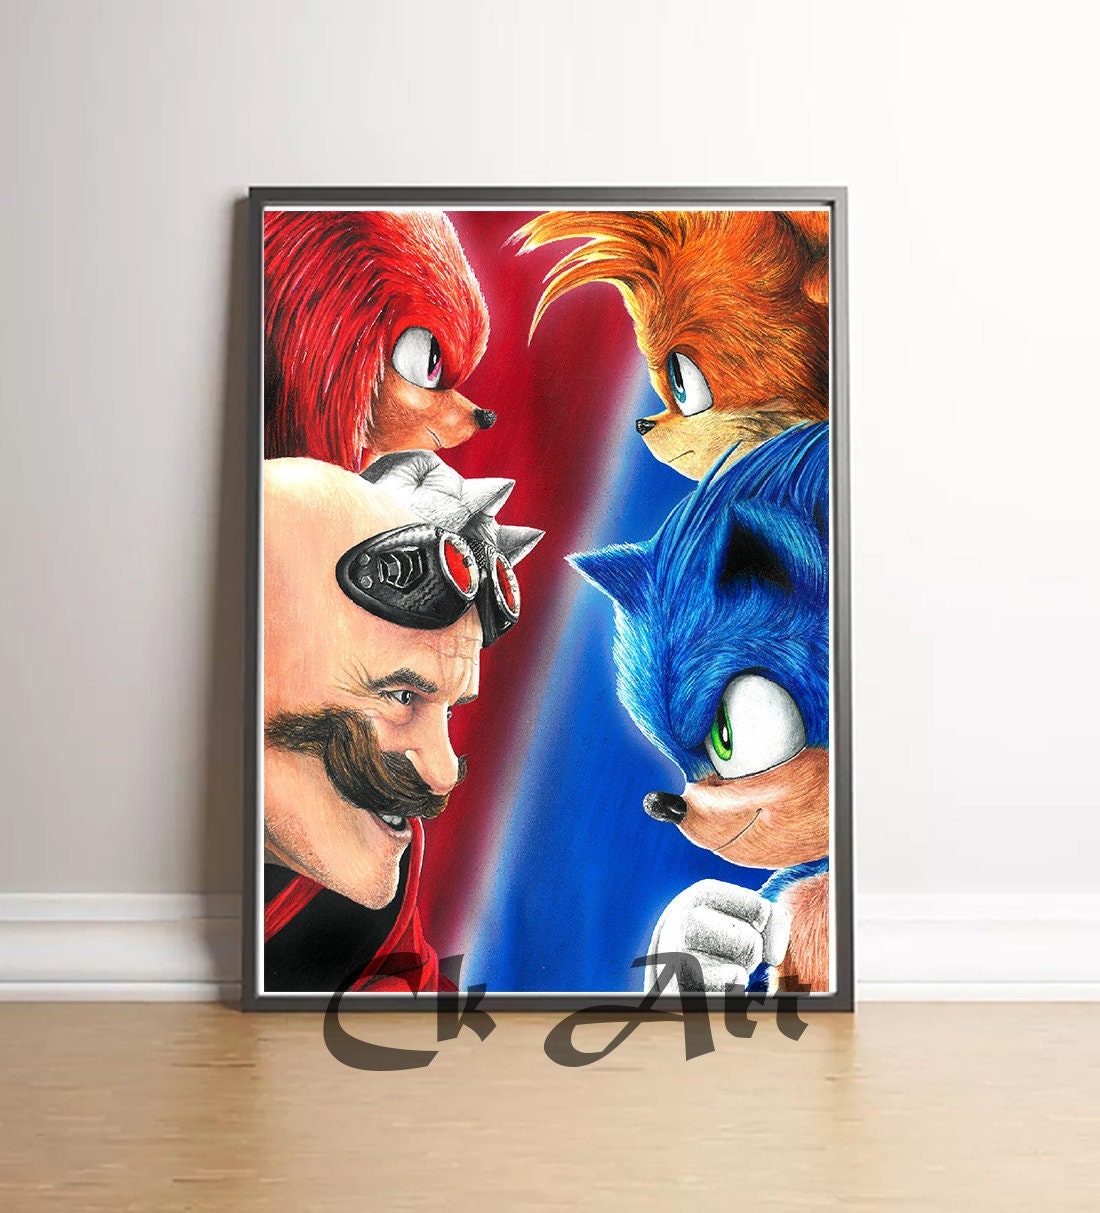 Guess What? Poster de Sonic 3, ]